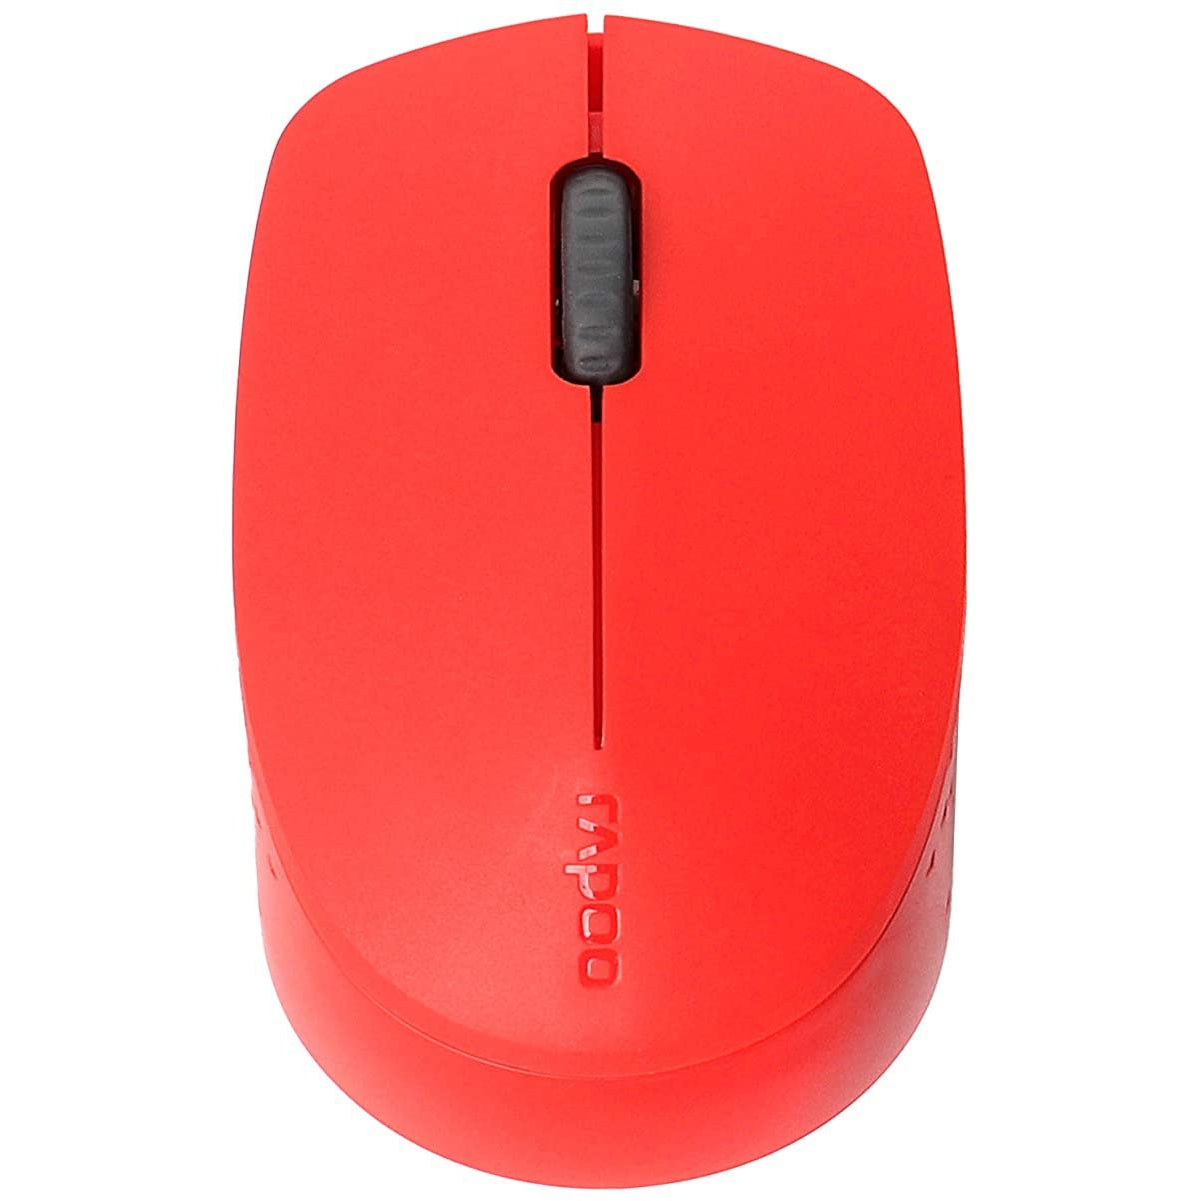 Rapoo M100 Multi-mode Wireless Silent Optical Mouse - Red - Refurbished Pristine